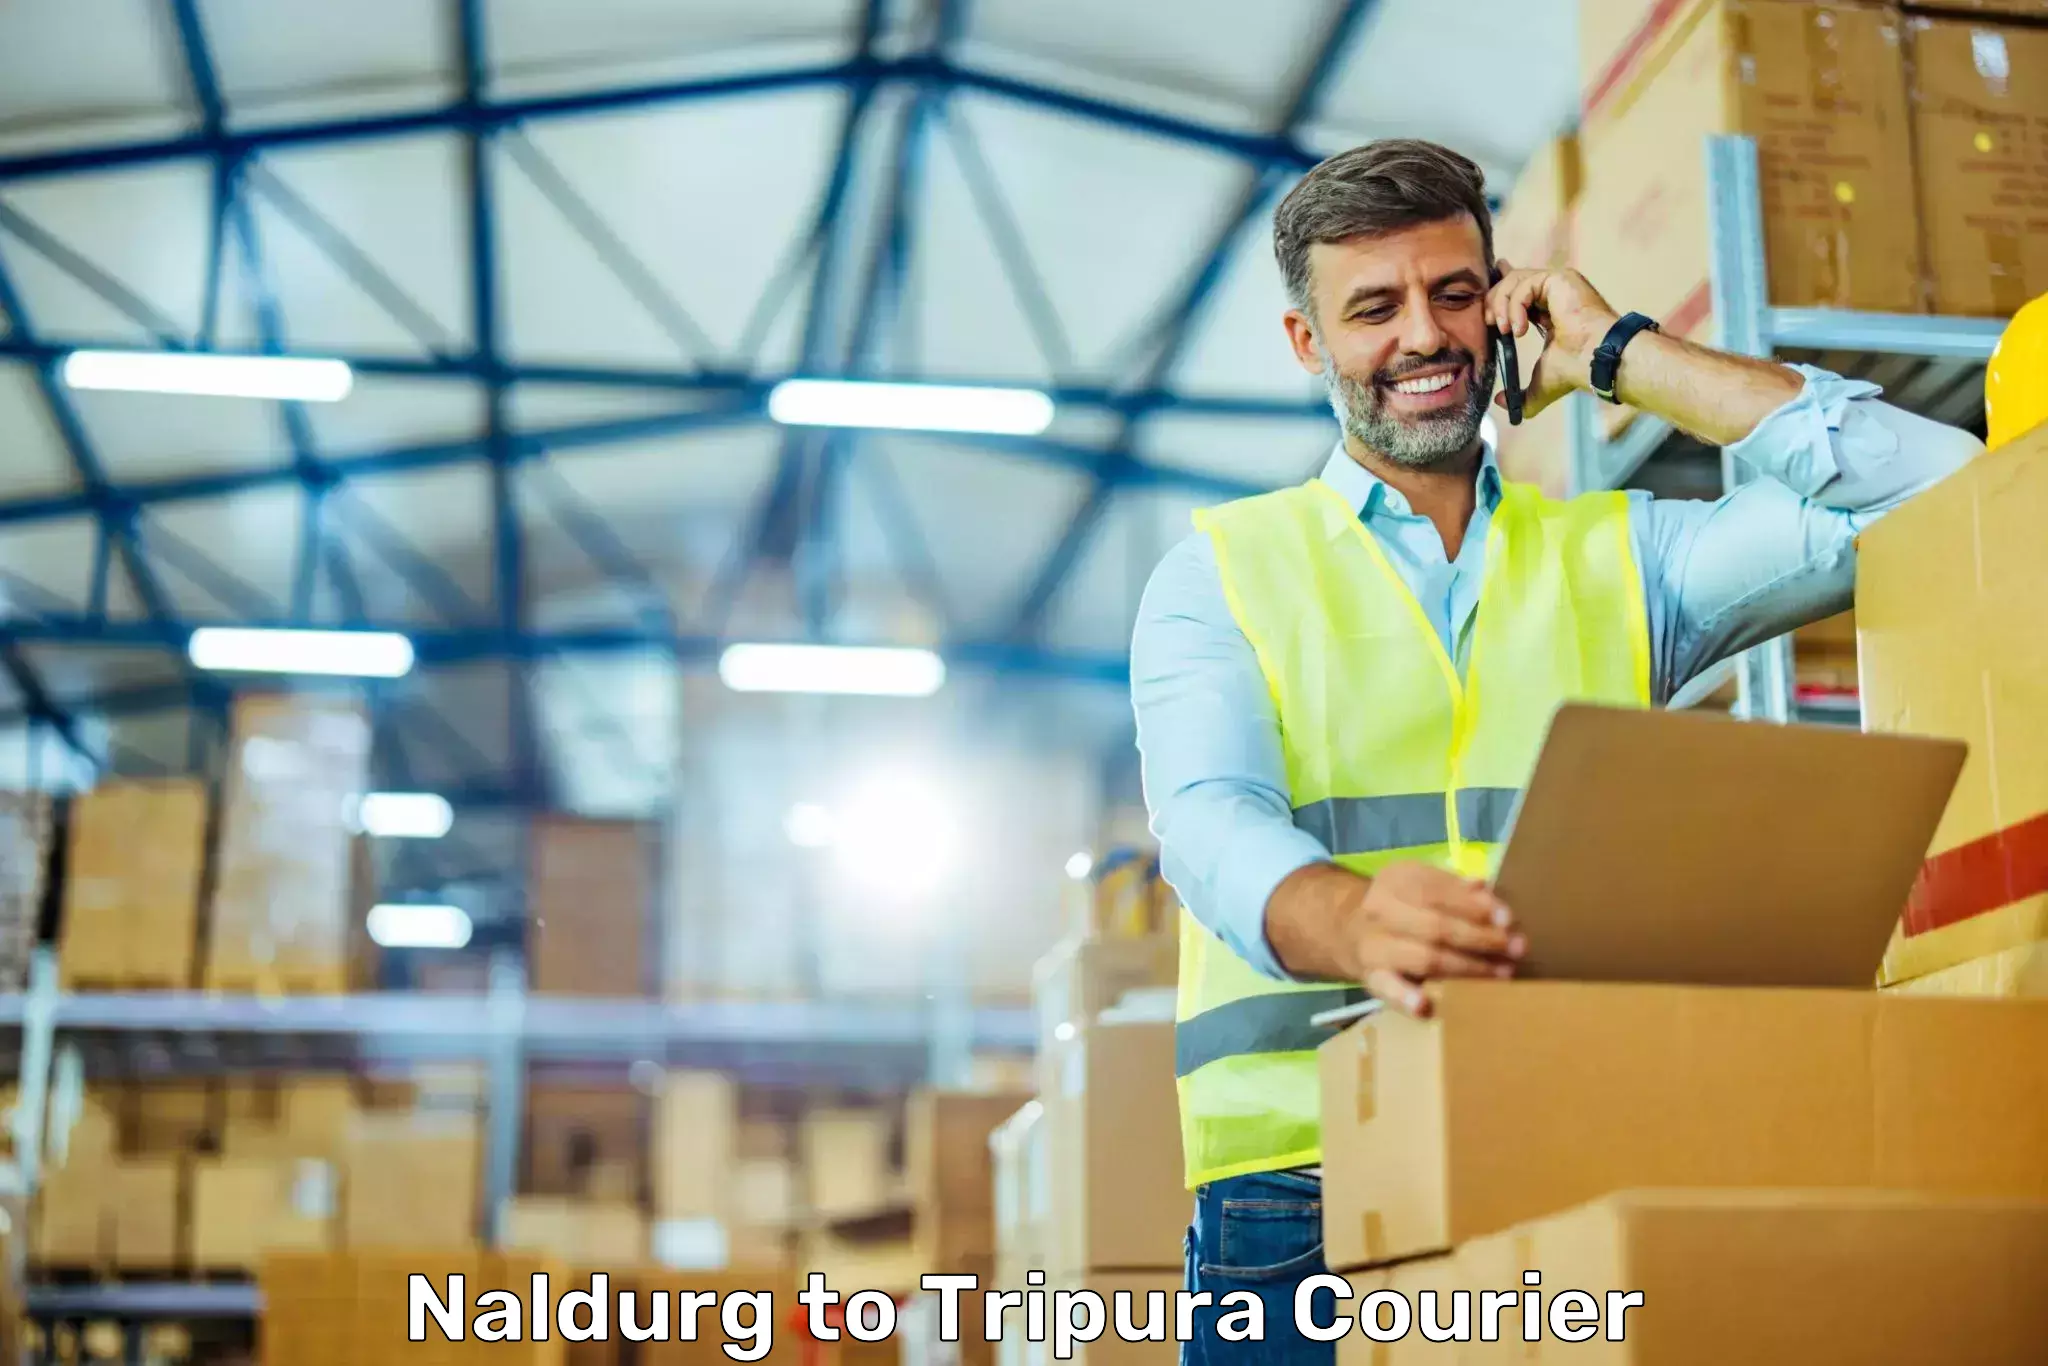 Express delivery solutions Naldurg to Udaipur Tripura